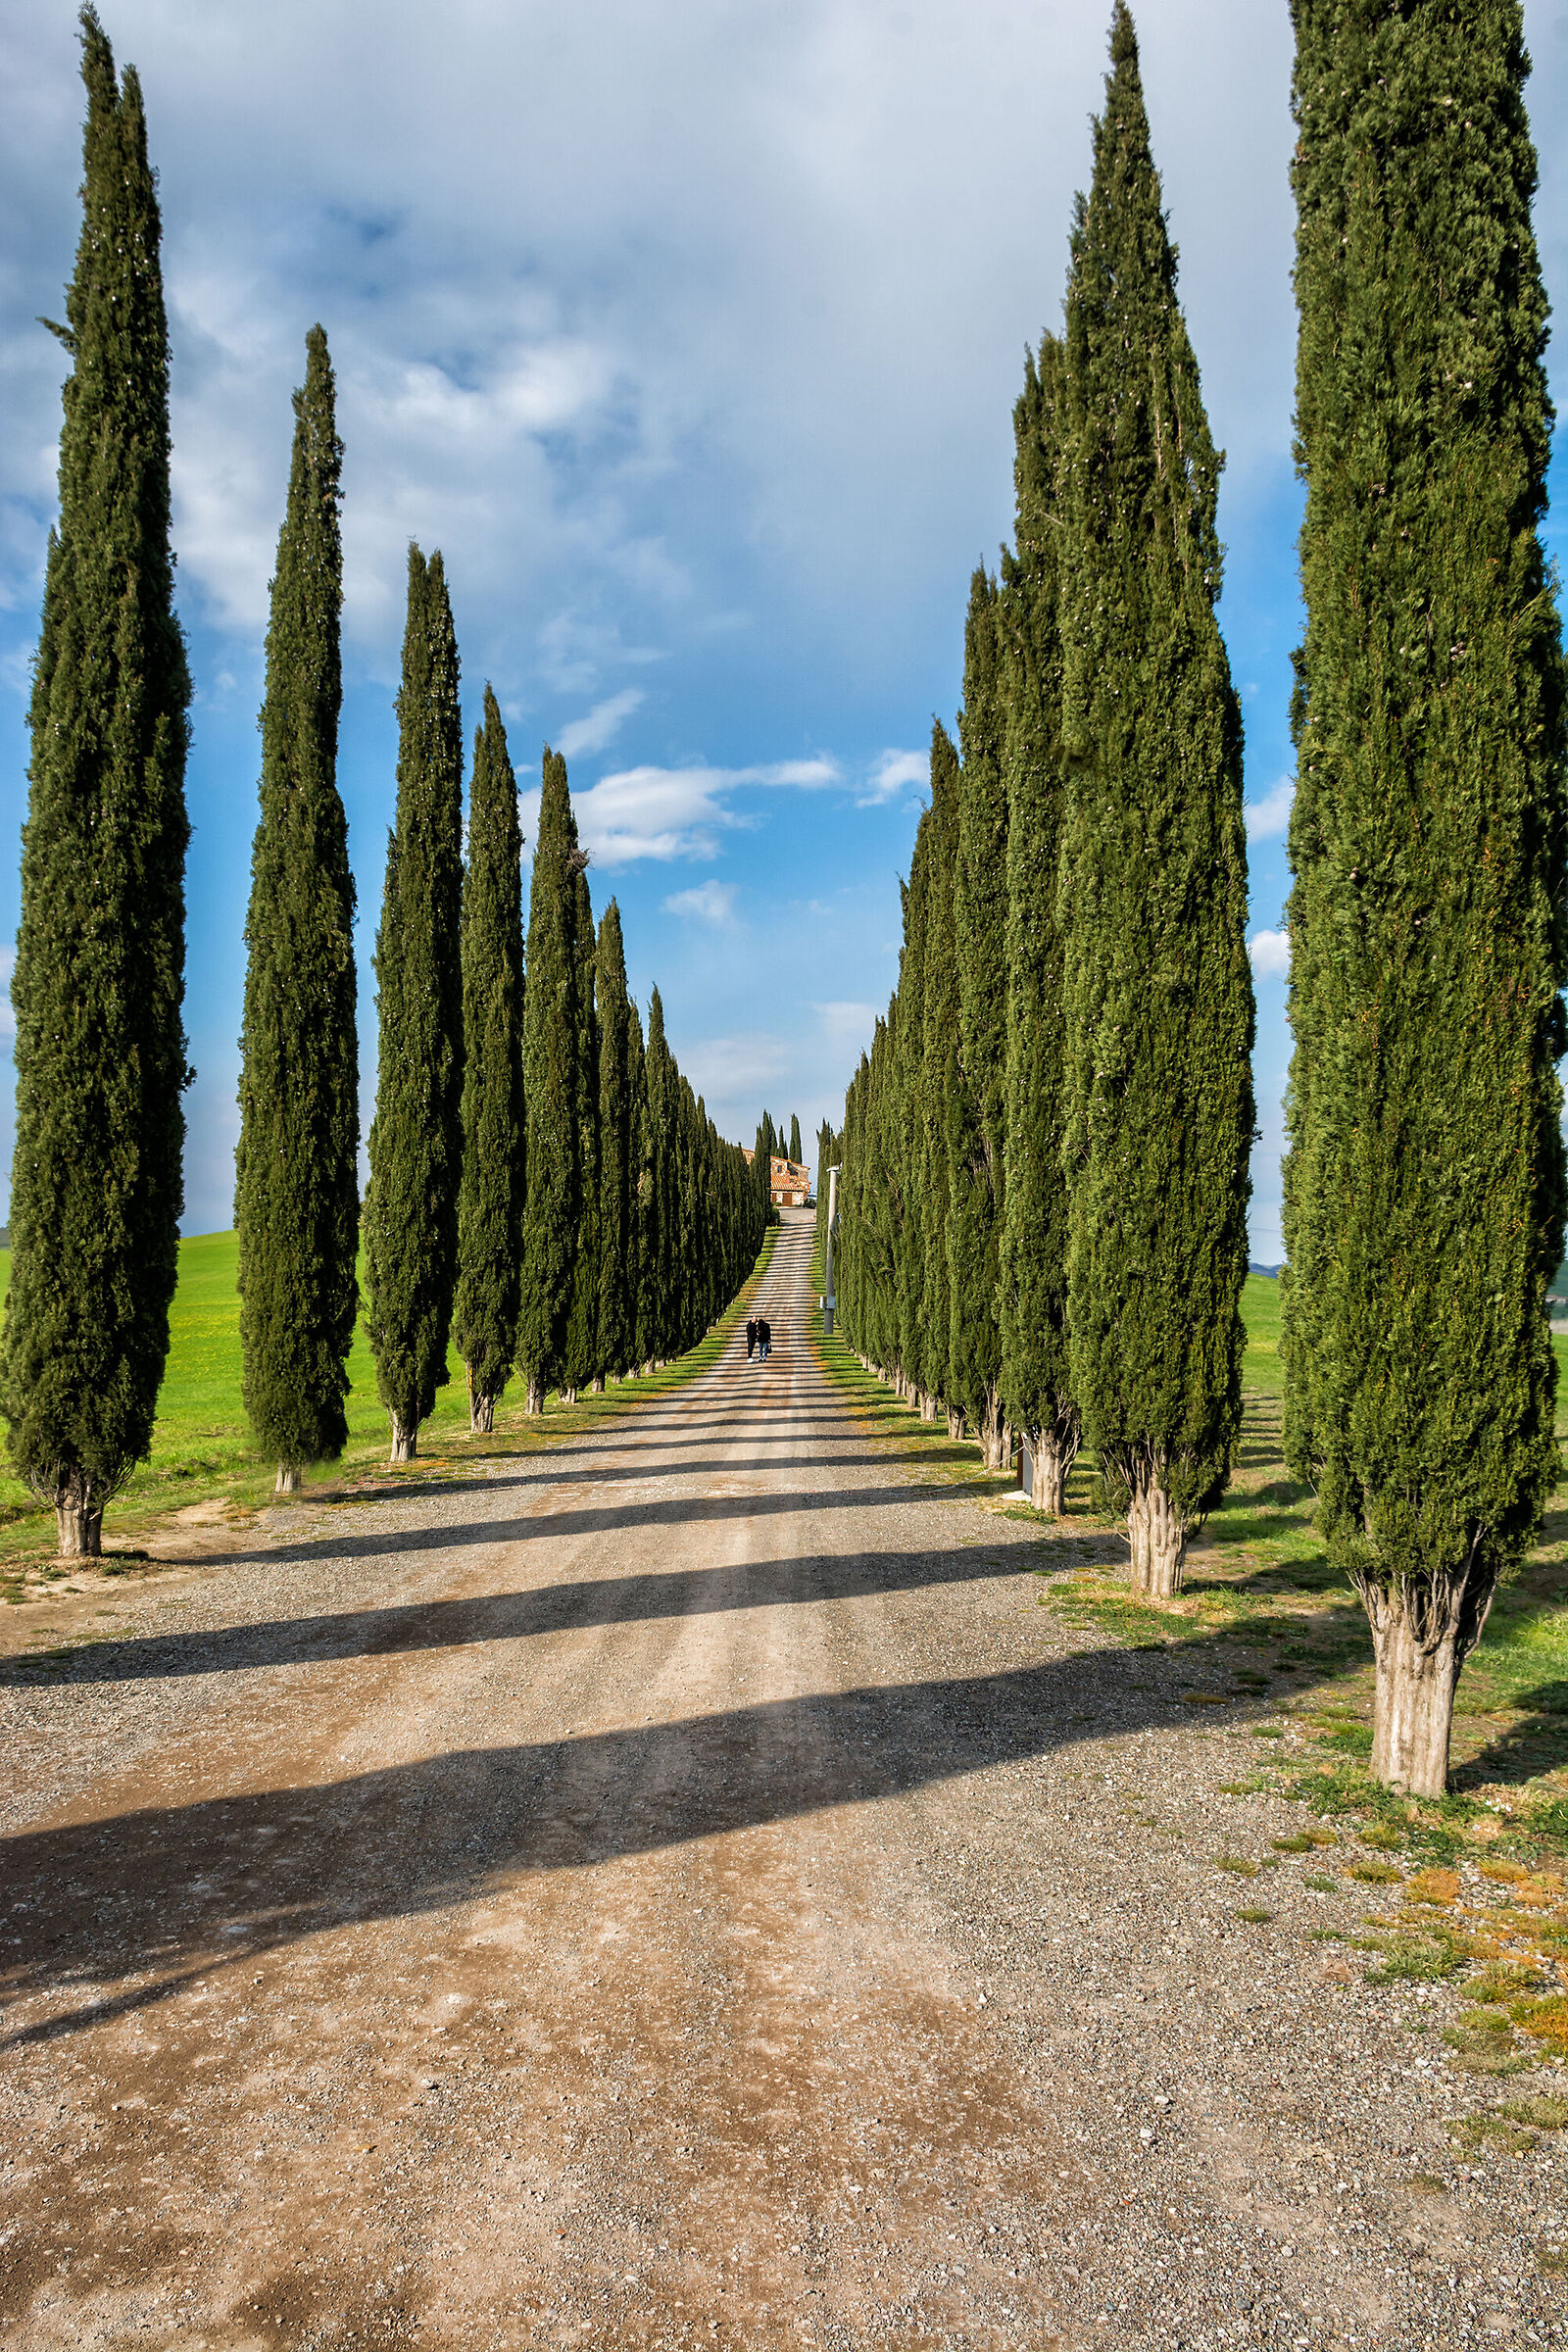 The avenue of cypress trees...